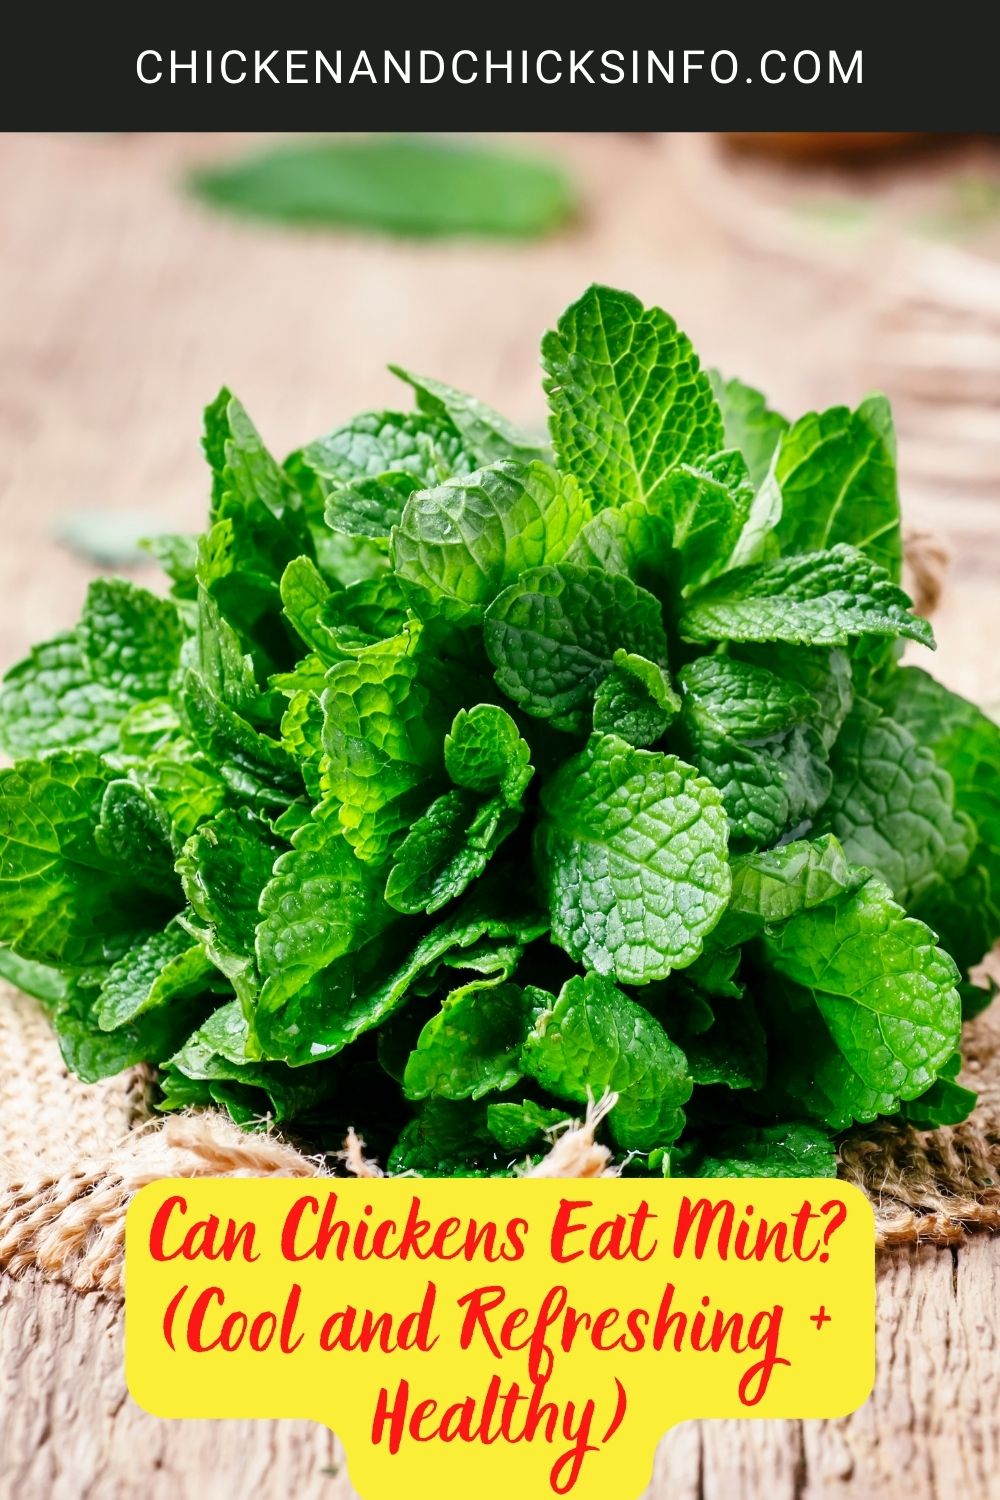 Can Chickens Eat Mint? (Cool and Refreshing + Healthy) poster.
